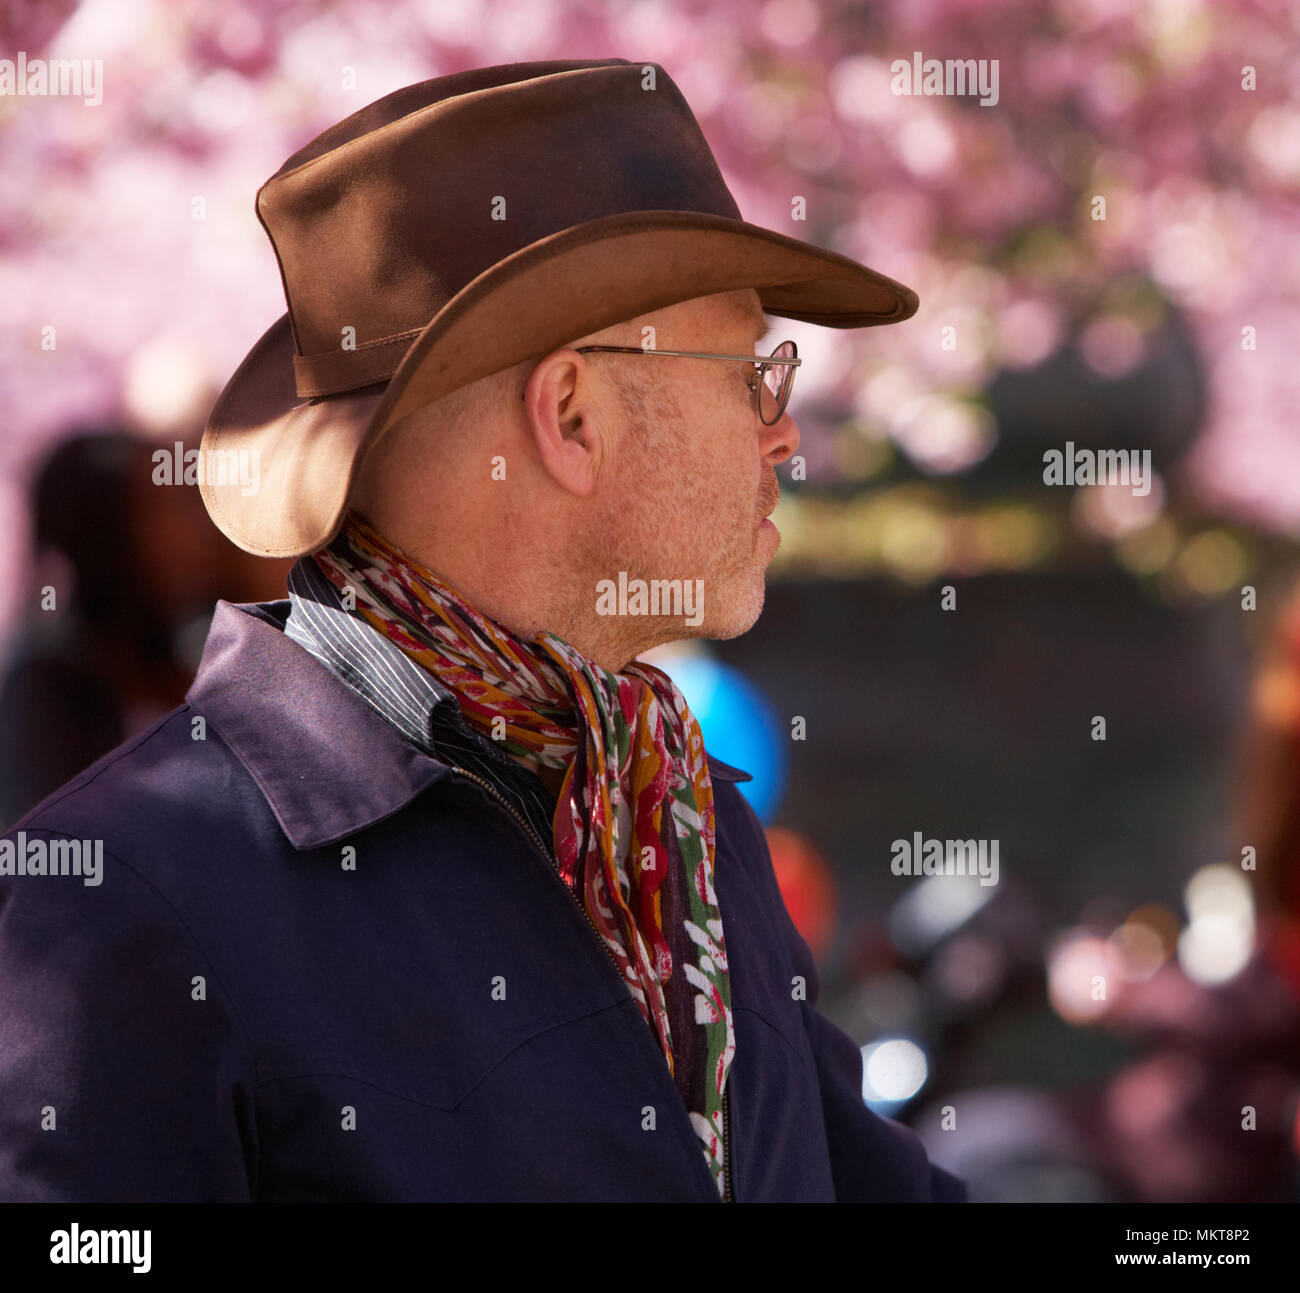 https://c8.alamy.com/comp/MKT8P2/stockholm-sweden-april-30-2012-spring-has-come-to-stockholm-and-people-are-enjoying-under-the-blossoming-japanese-cherry-trees-in-the-park-kungs-MKT8P2.jpg